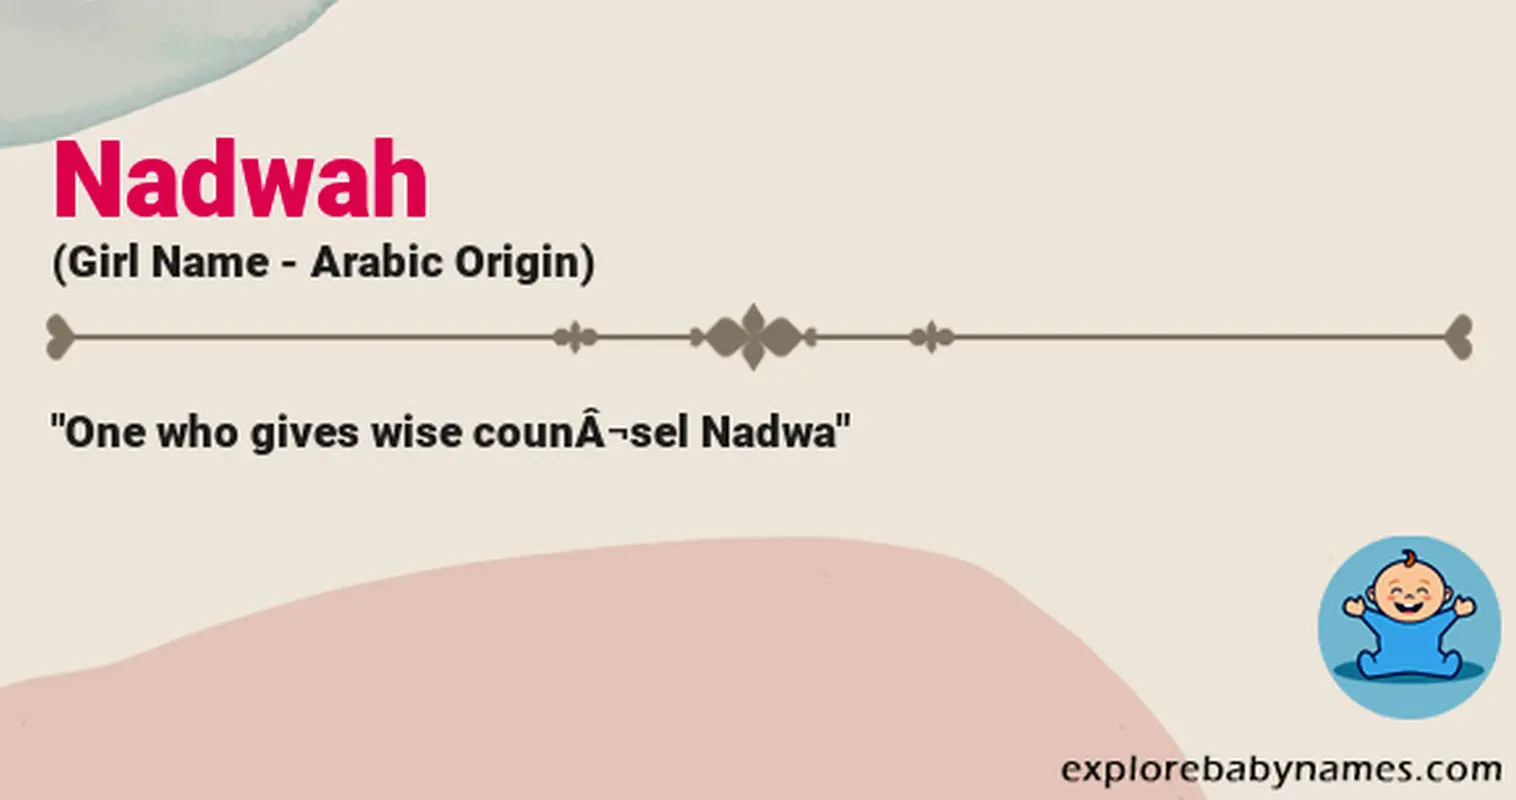 Meaning of Nadwah